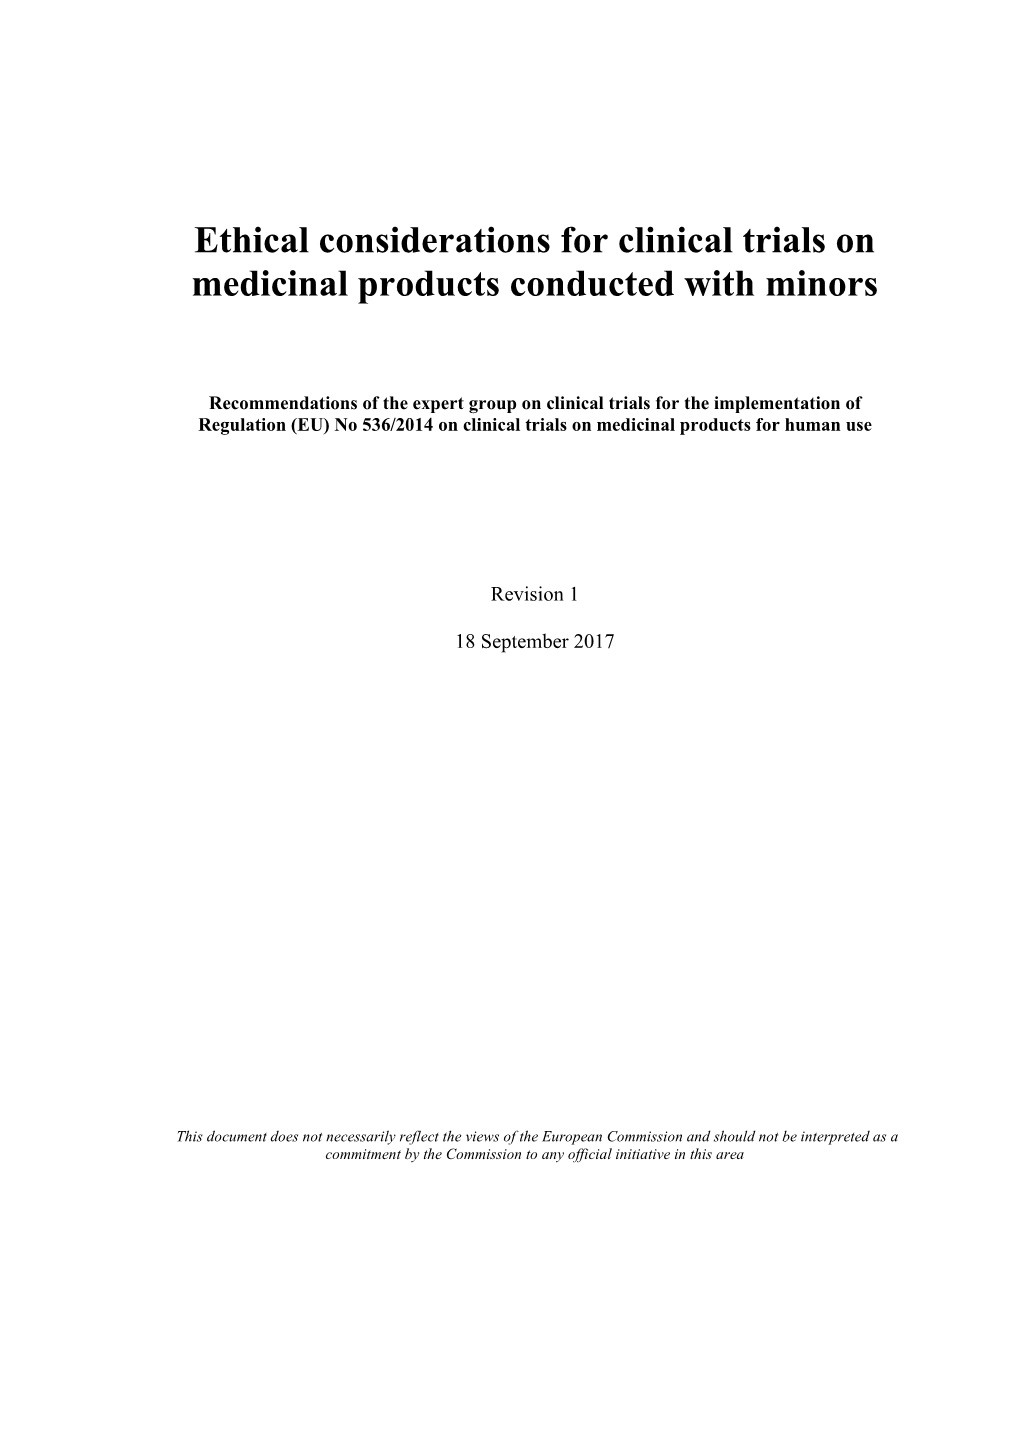 Ethical Considerations for Clinical Trials on Medicinal Products Conducted with Minors